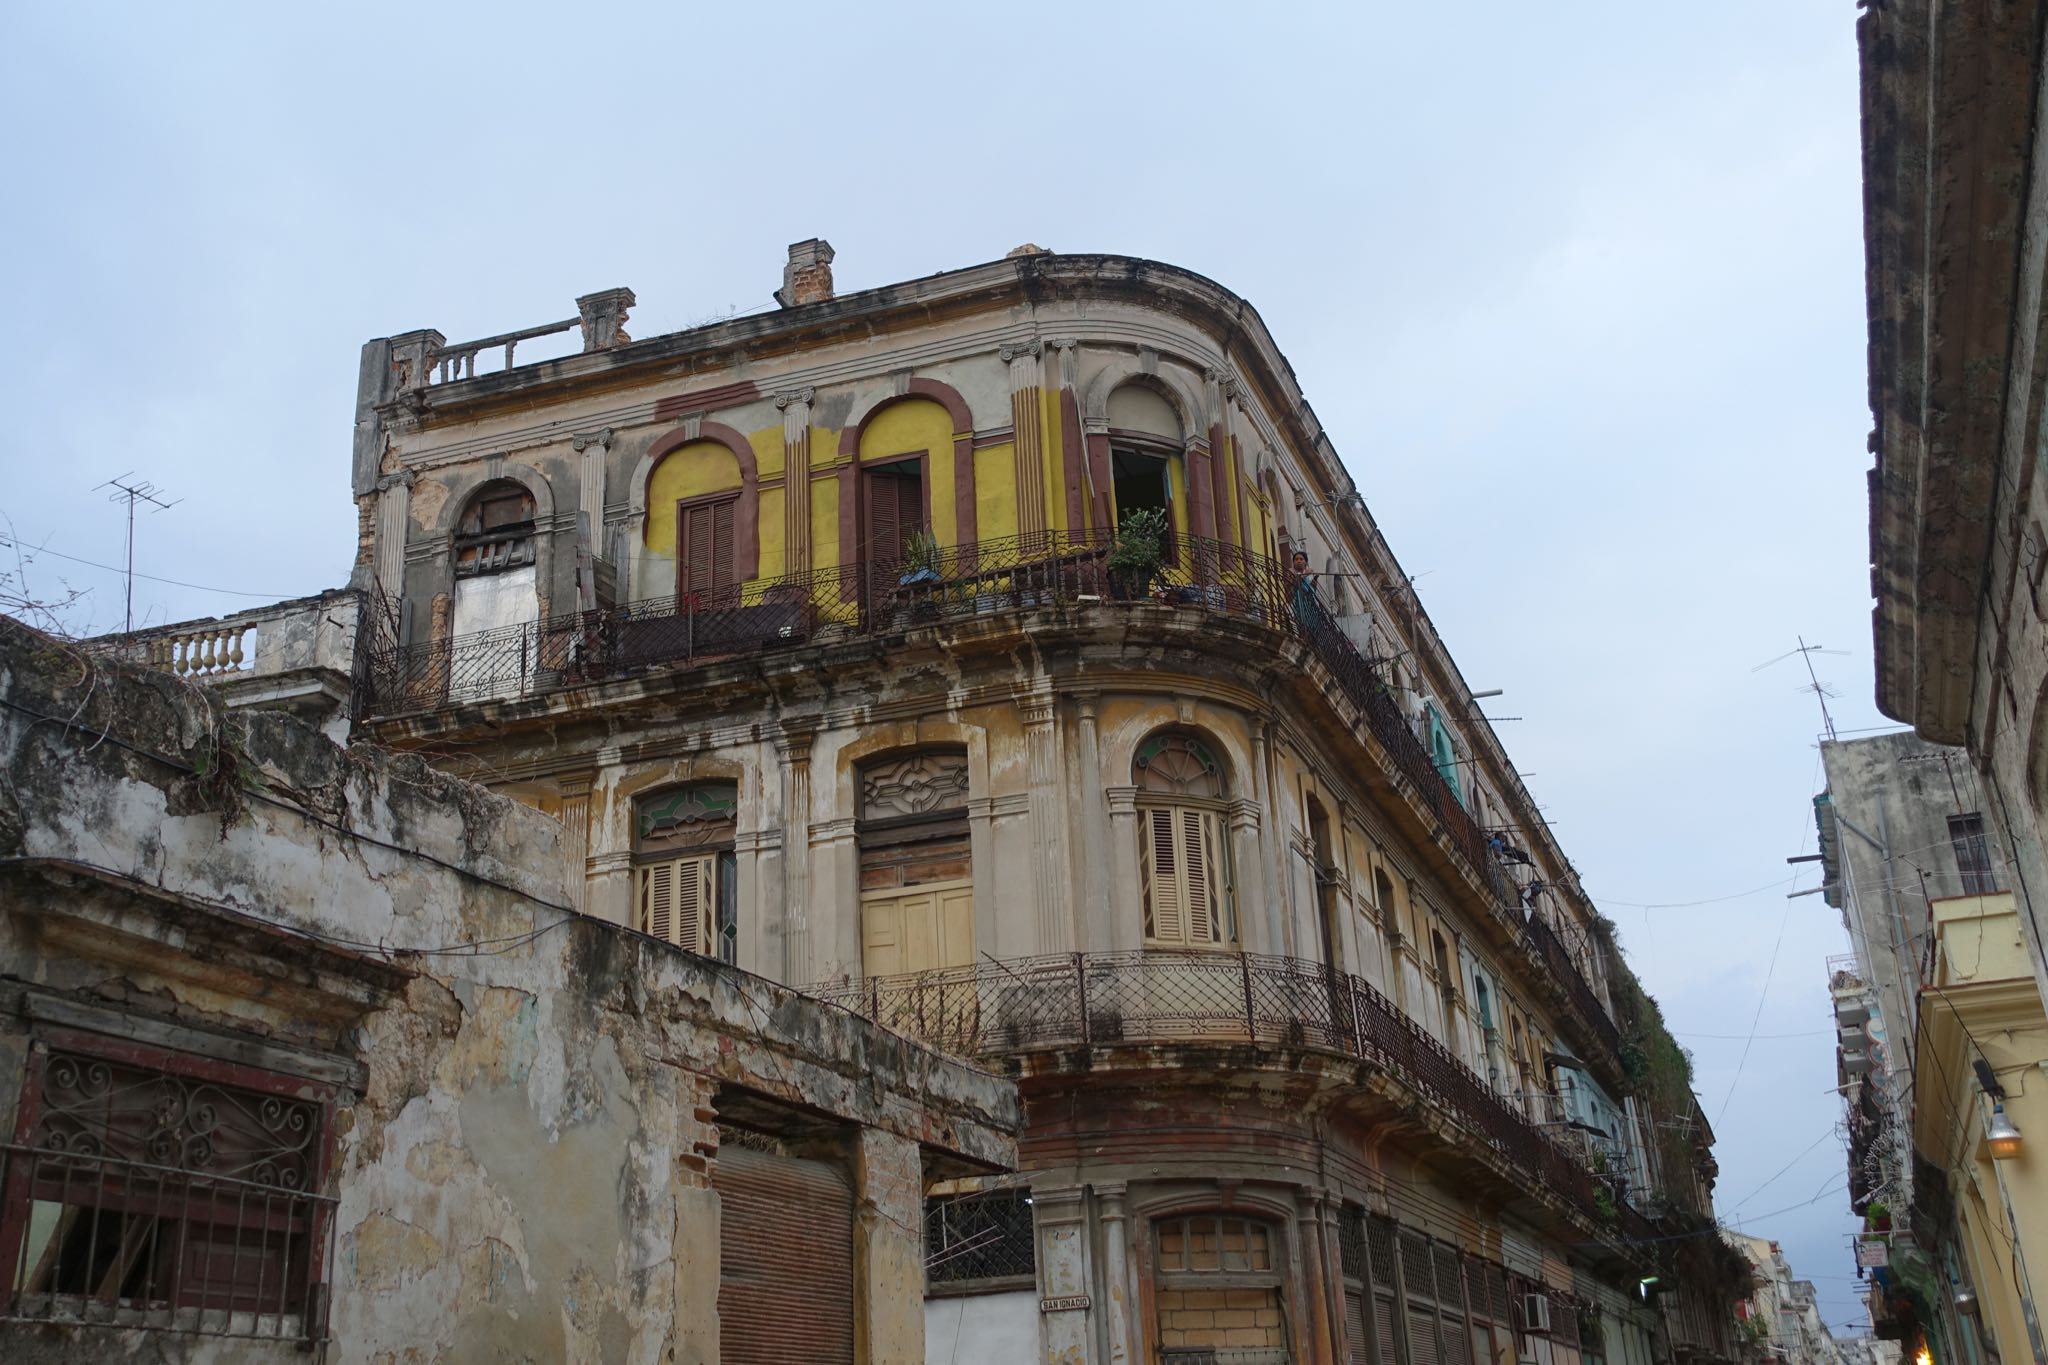 Photo 125 of 221 from the album Highlights Cuba 2019.